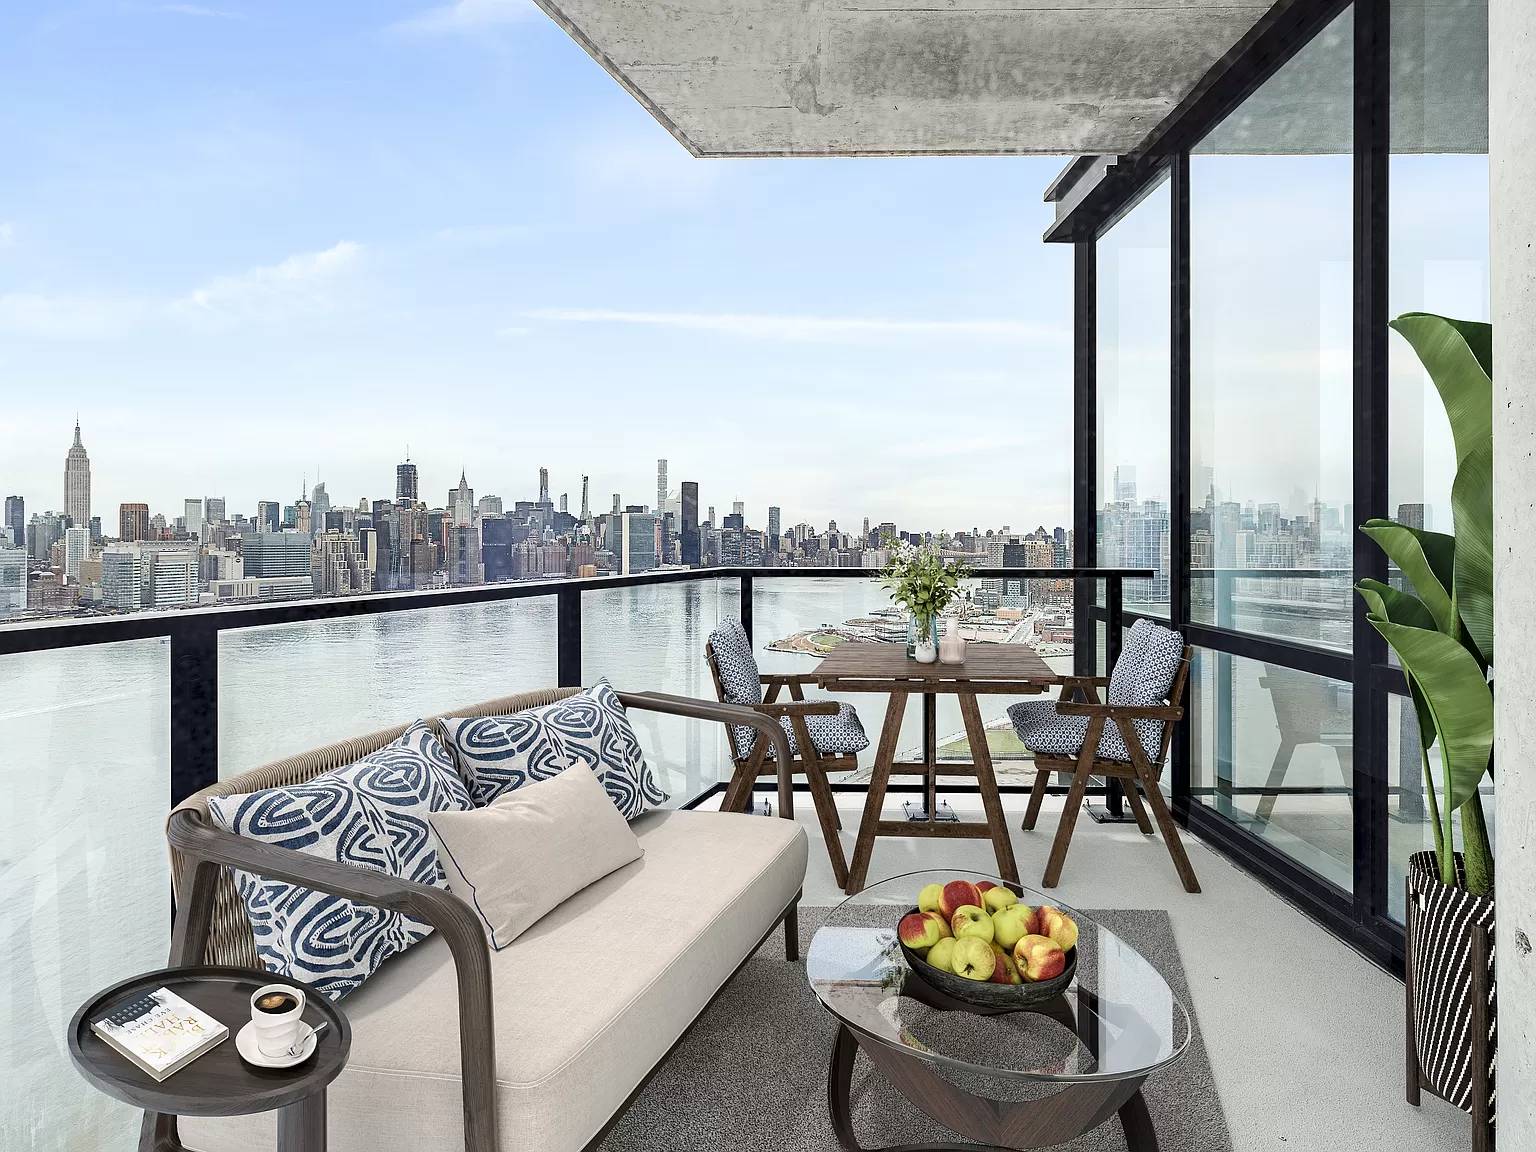 NO FEE 2BR/2B Apartment in Luxury Greenpoint Waterfront Apartment Community